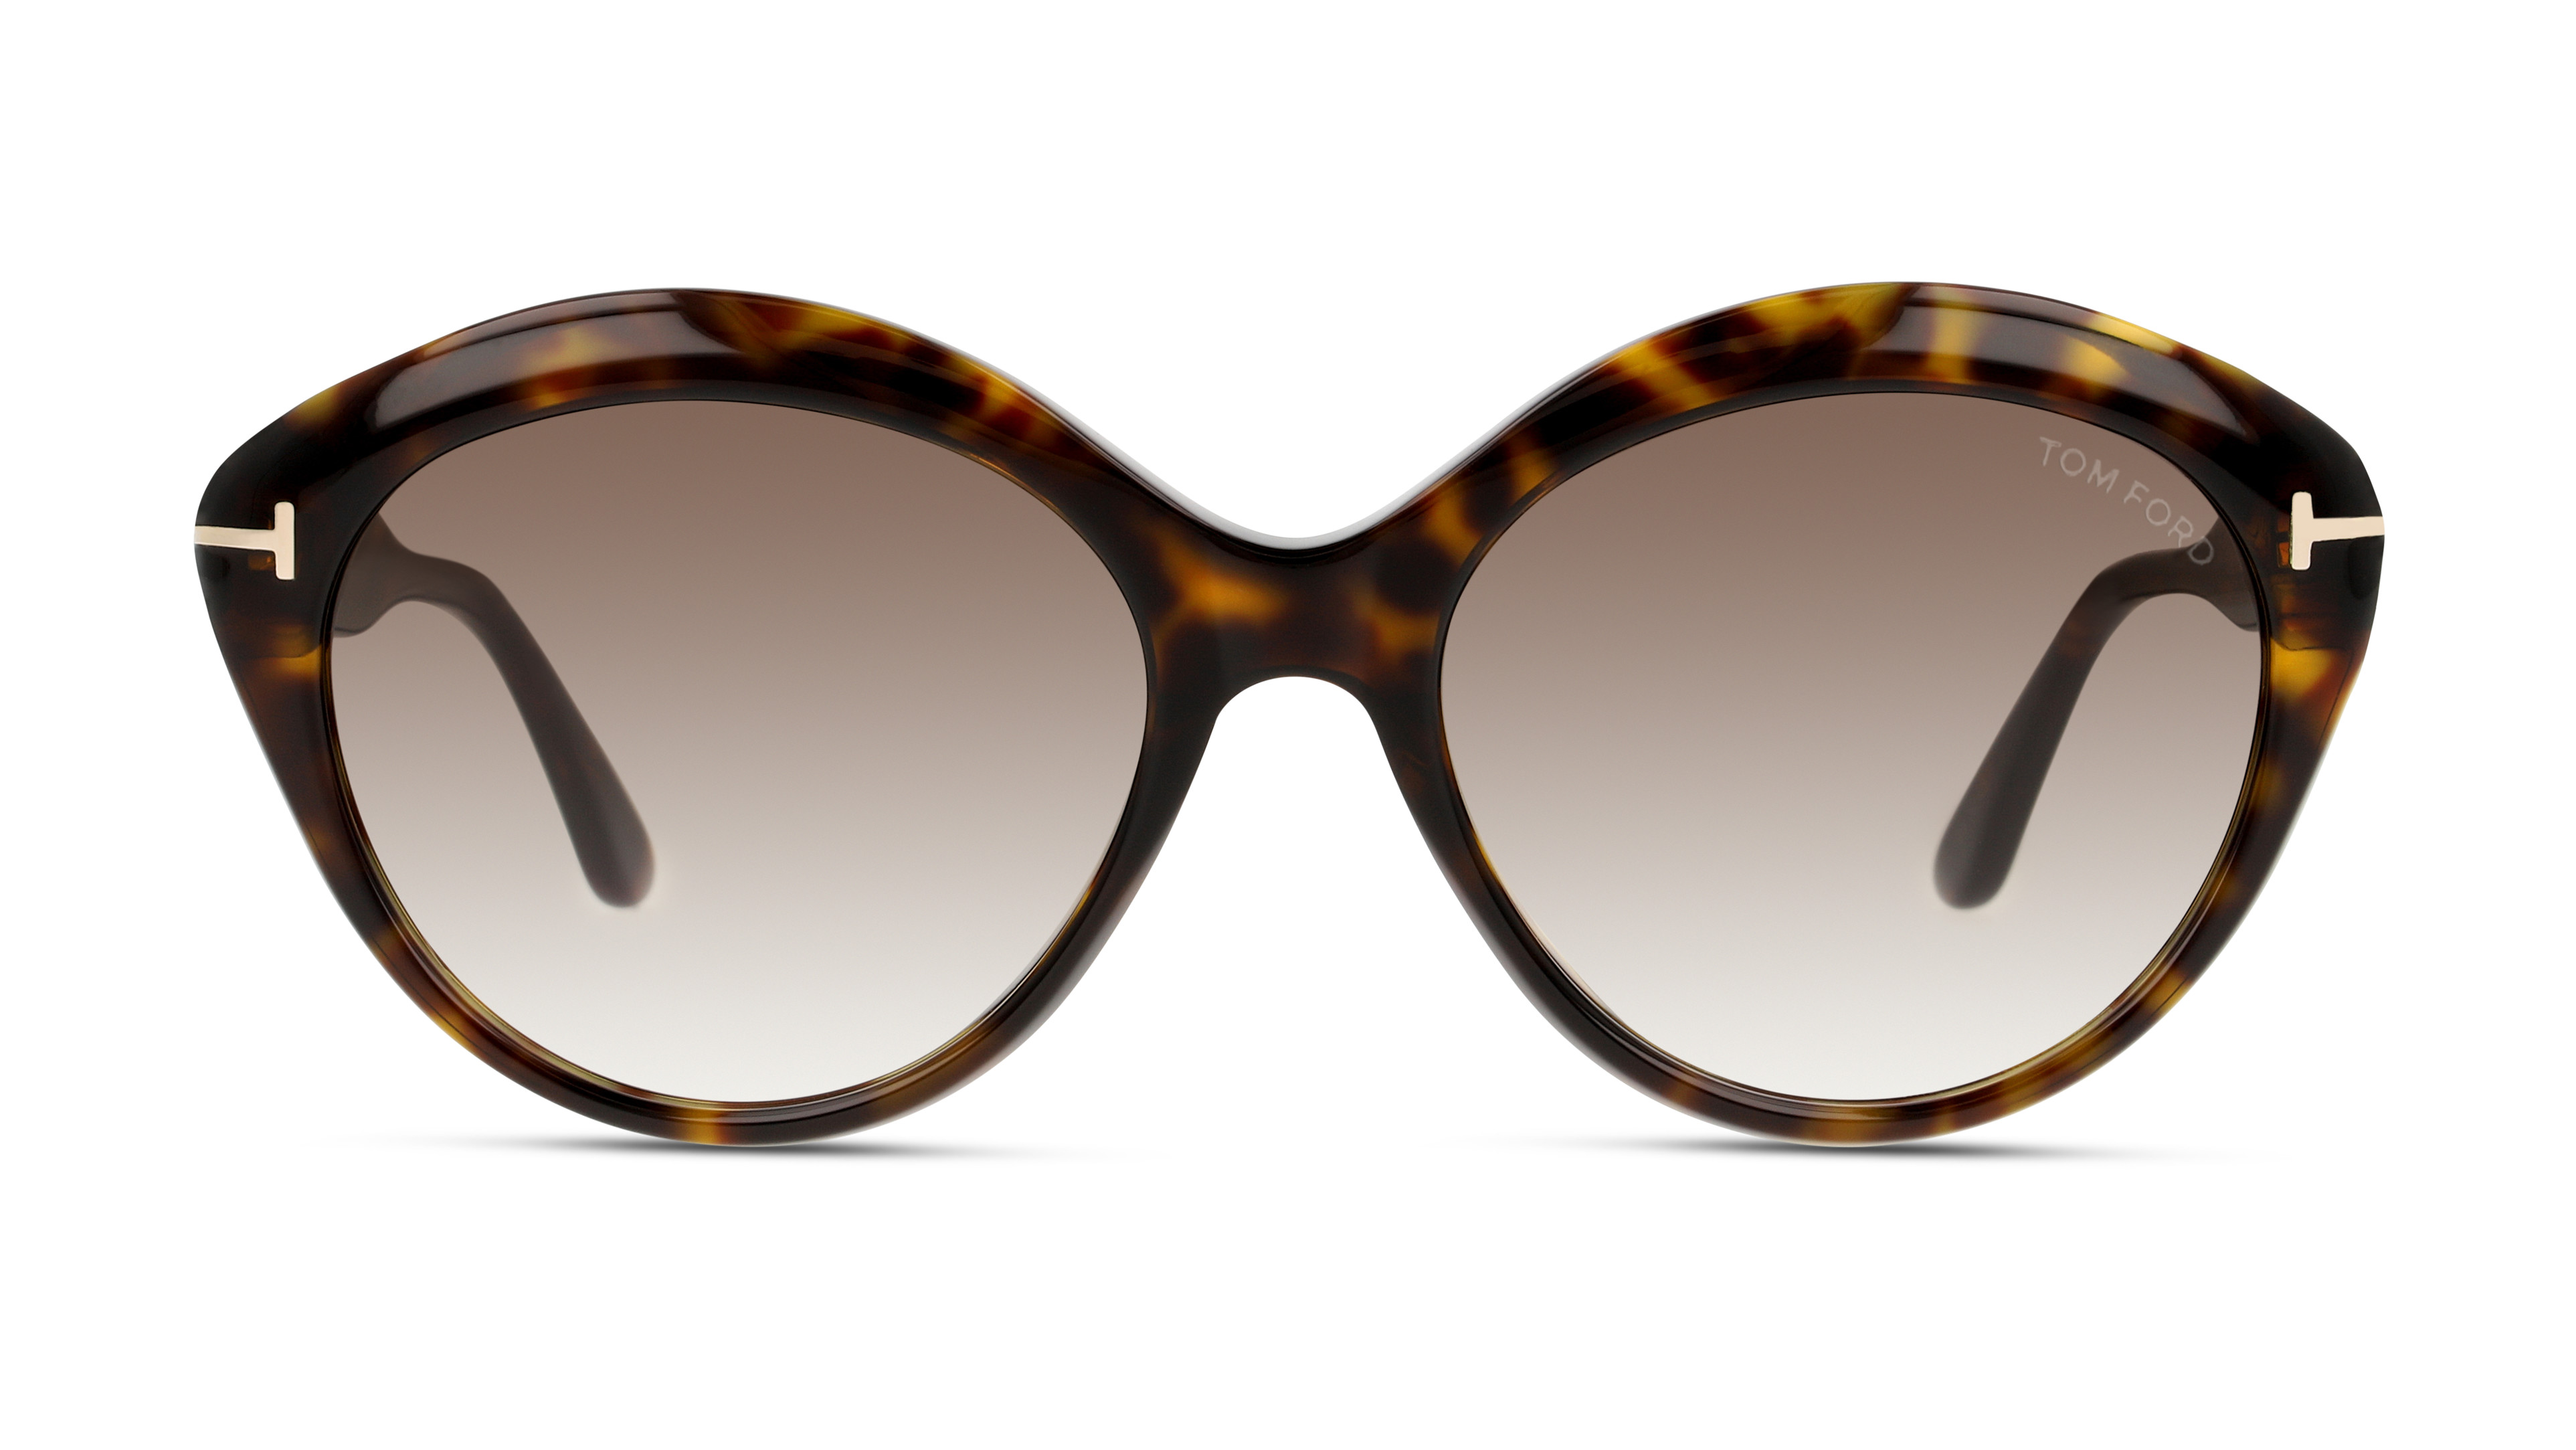 [products.image.front] Tom Ford FT0763 52K Sonnenbrille